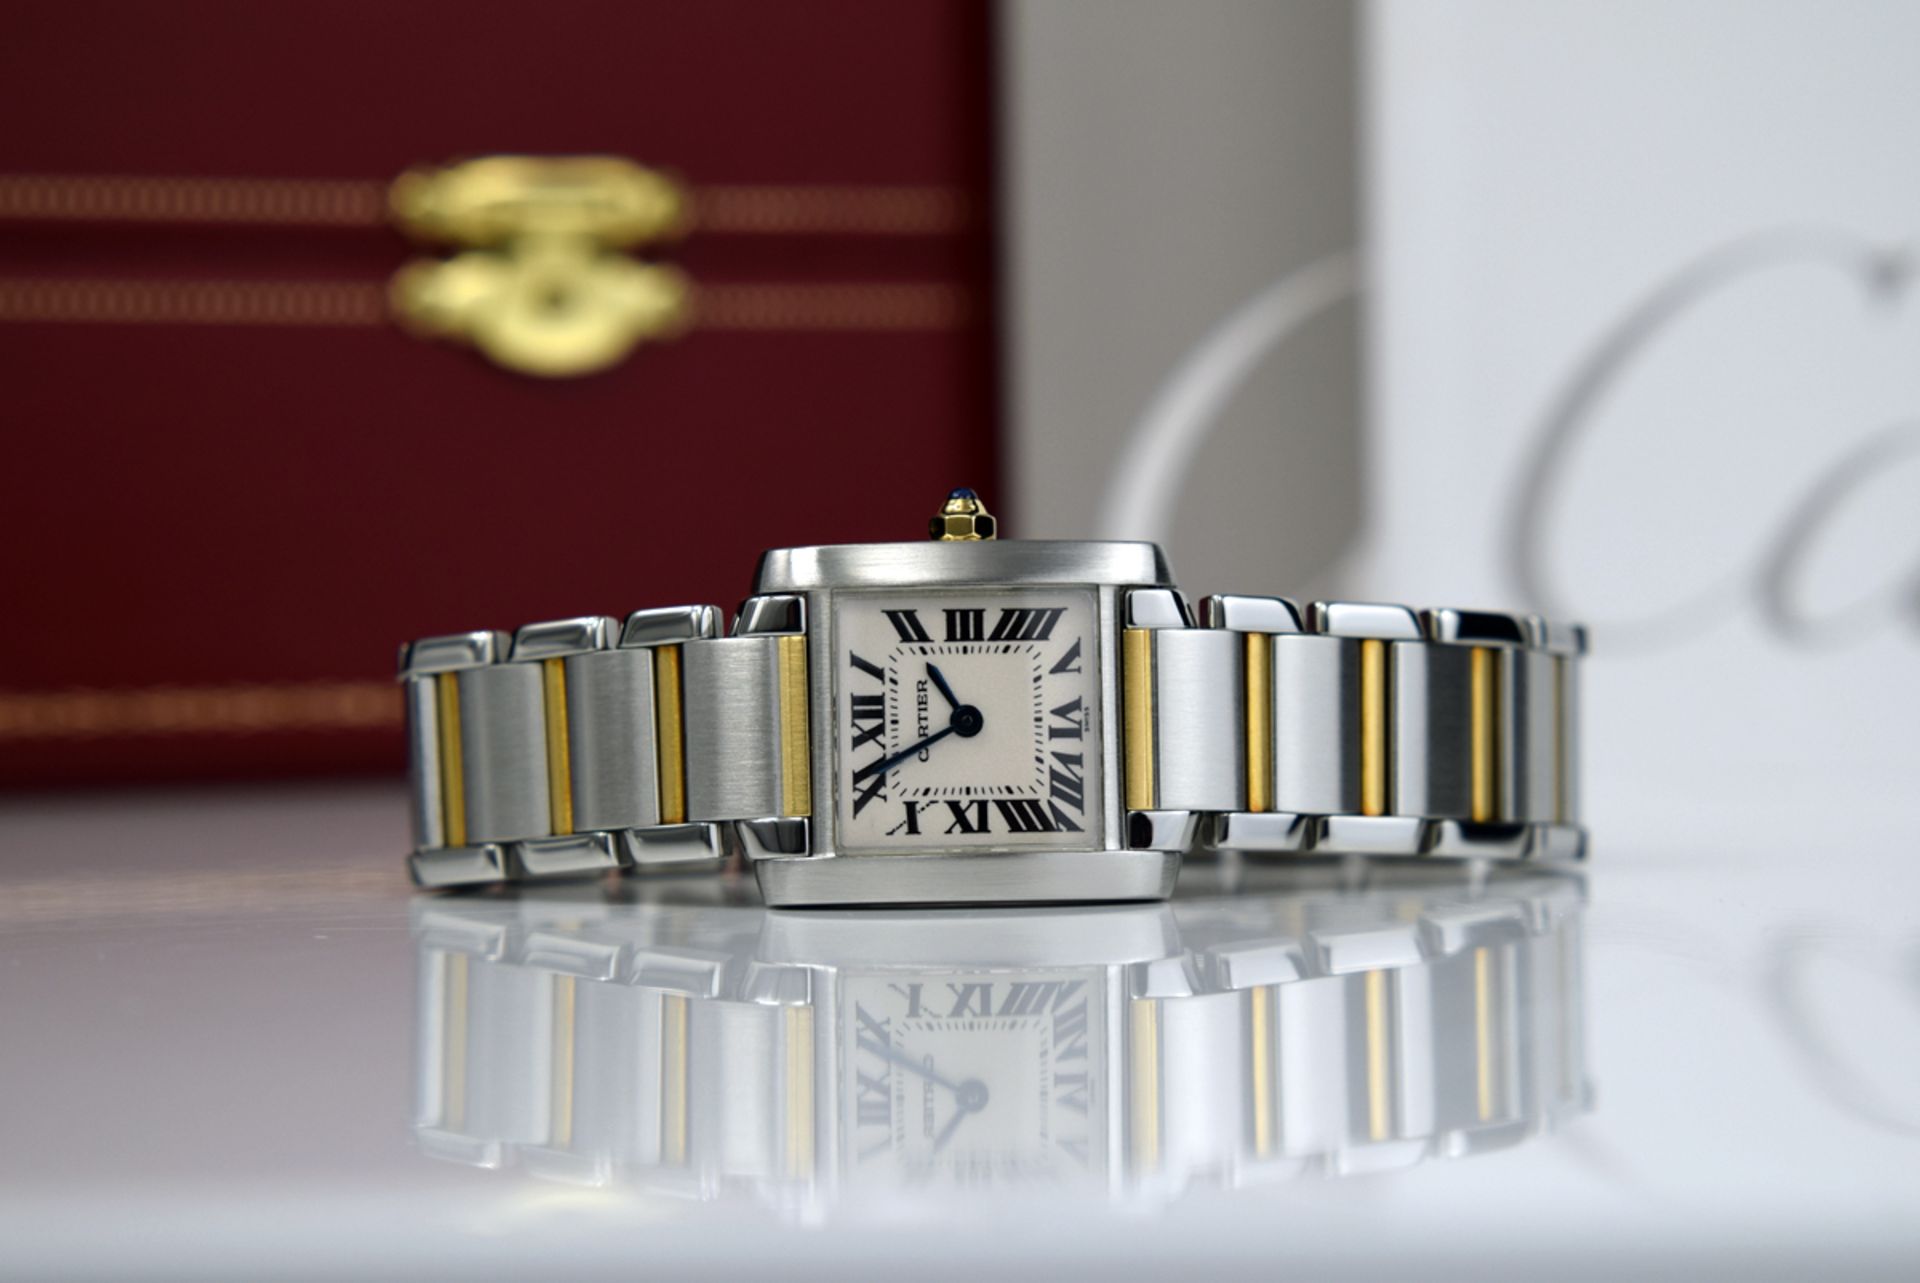 CARTIER FRANCAISE 'TANK' - 18K GOLD & STEEL - W51007Q4 / 2300 - Image 2 of 12